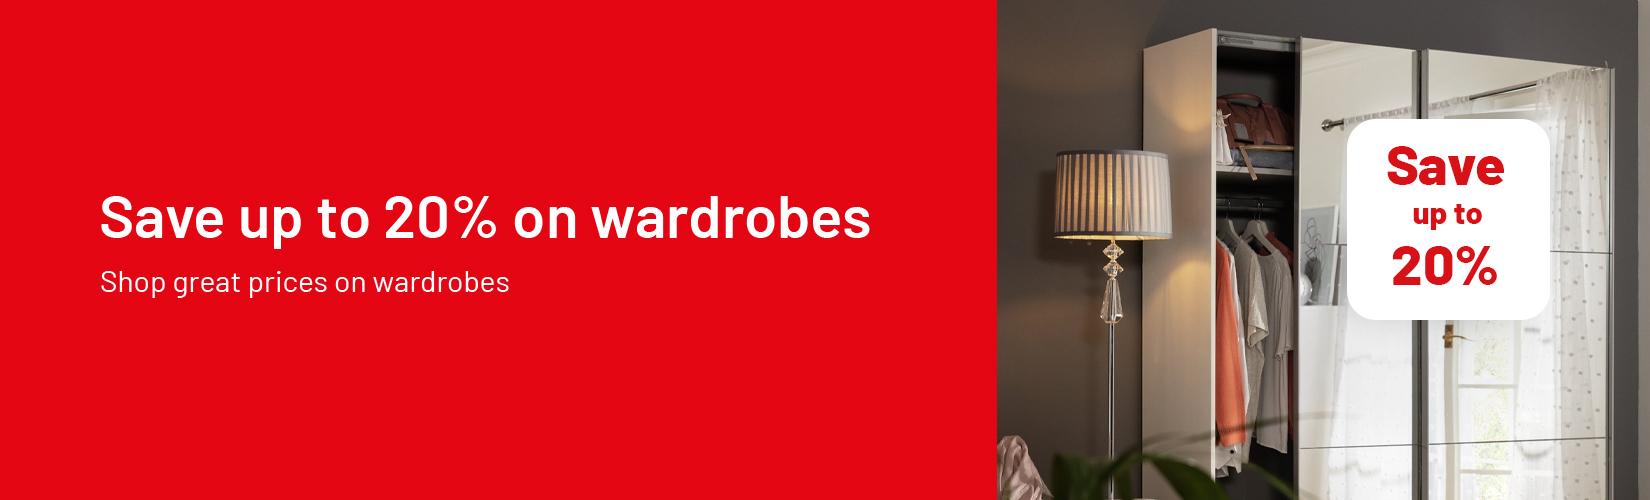 Save up to 20% on wardrobes. Shop great prices on wardrobes.